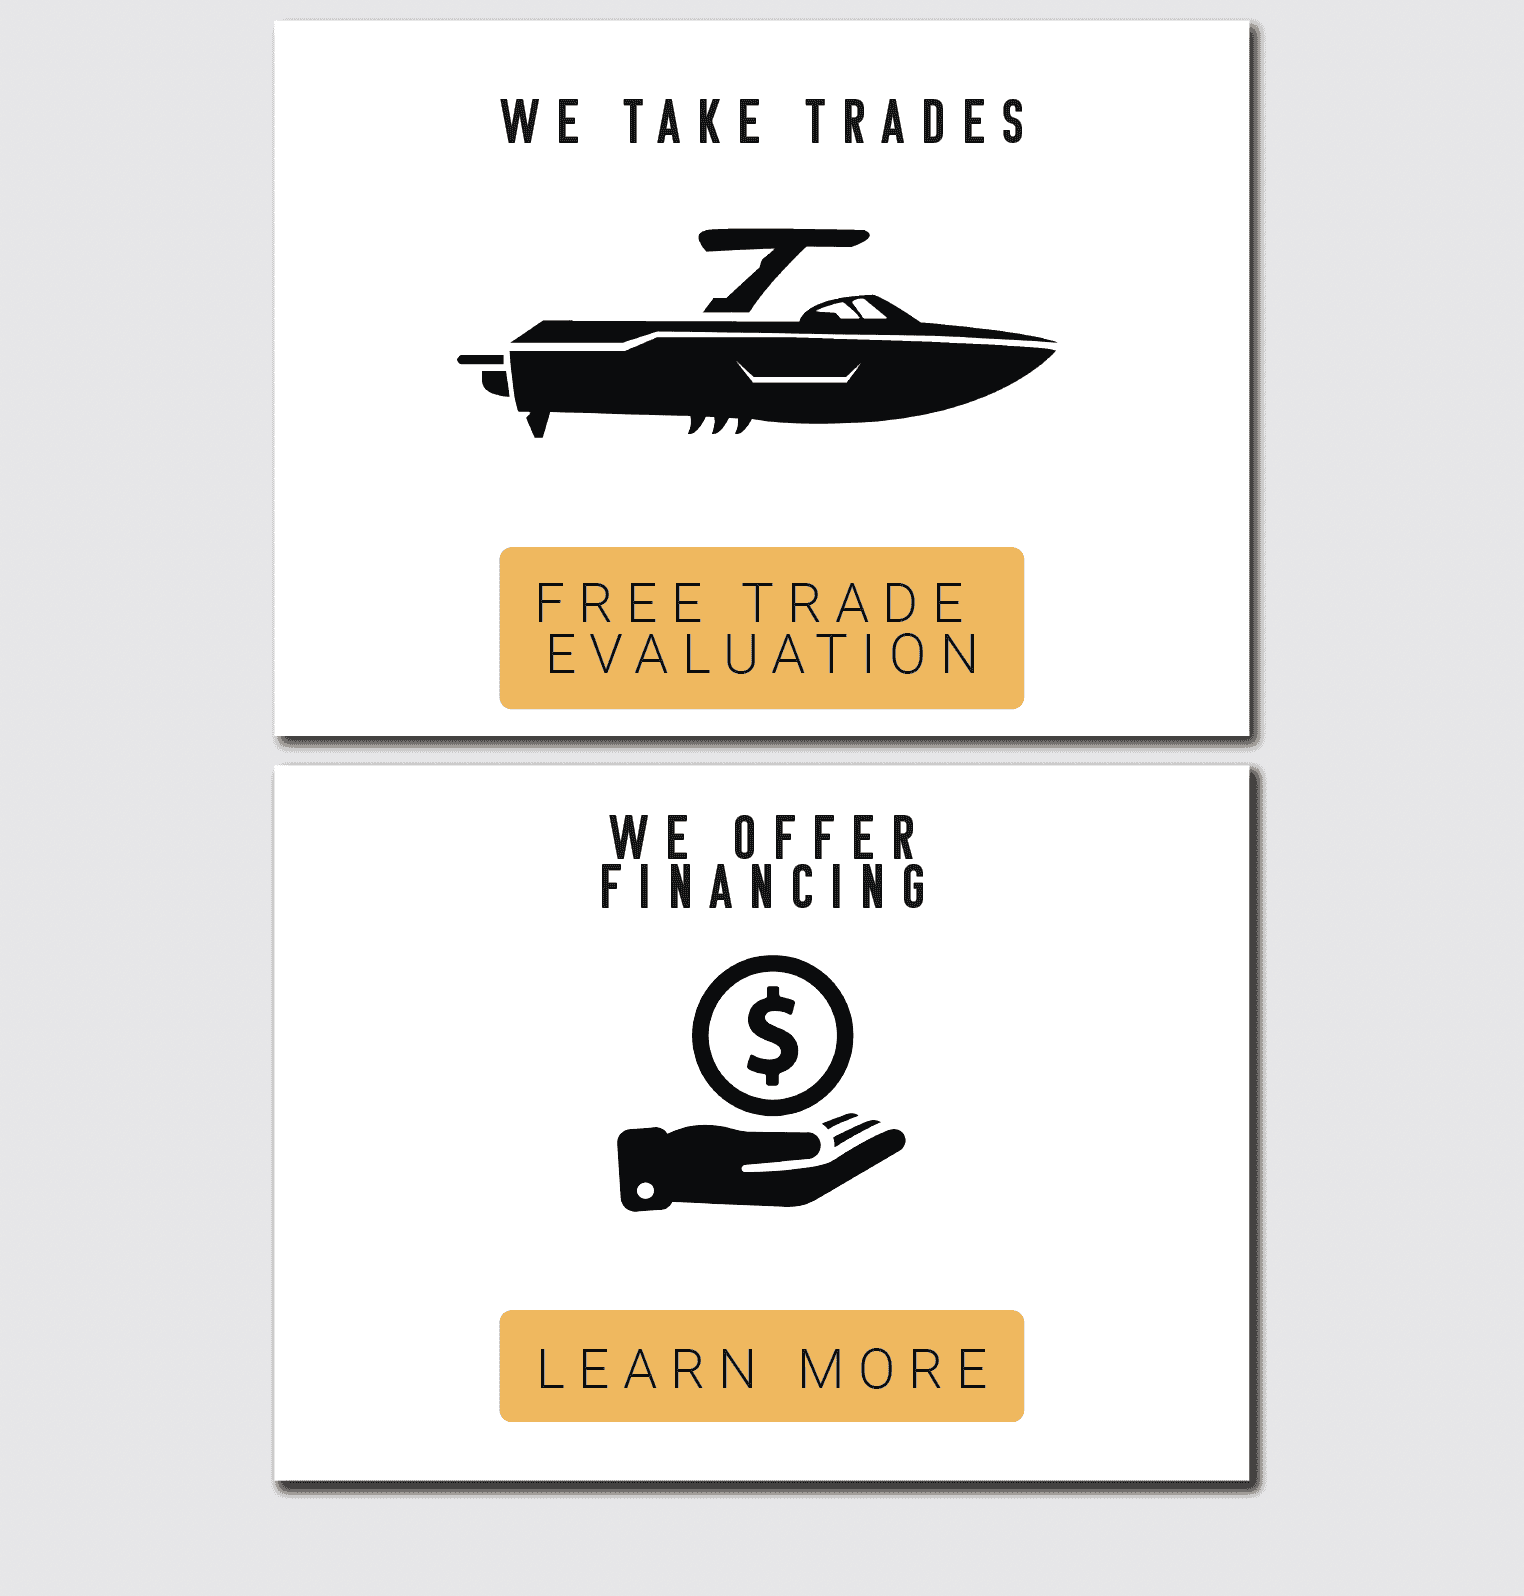 Go to taylorsboats.com (--xget_quote subpage)